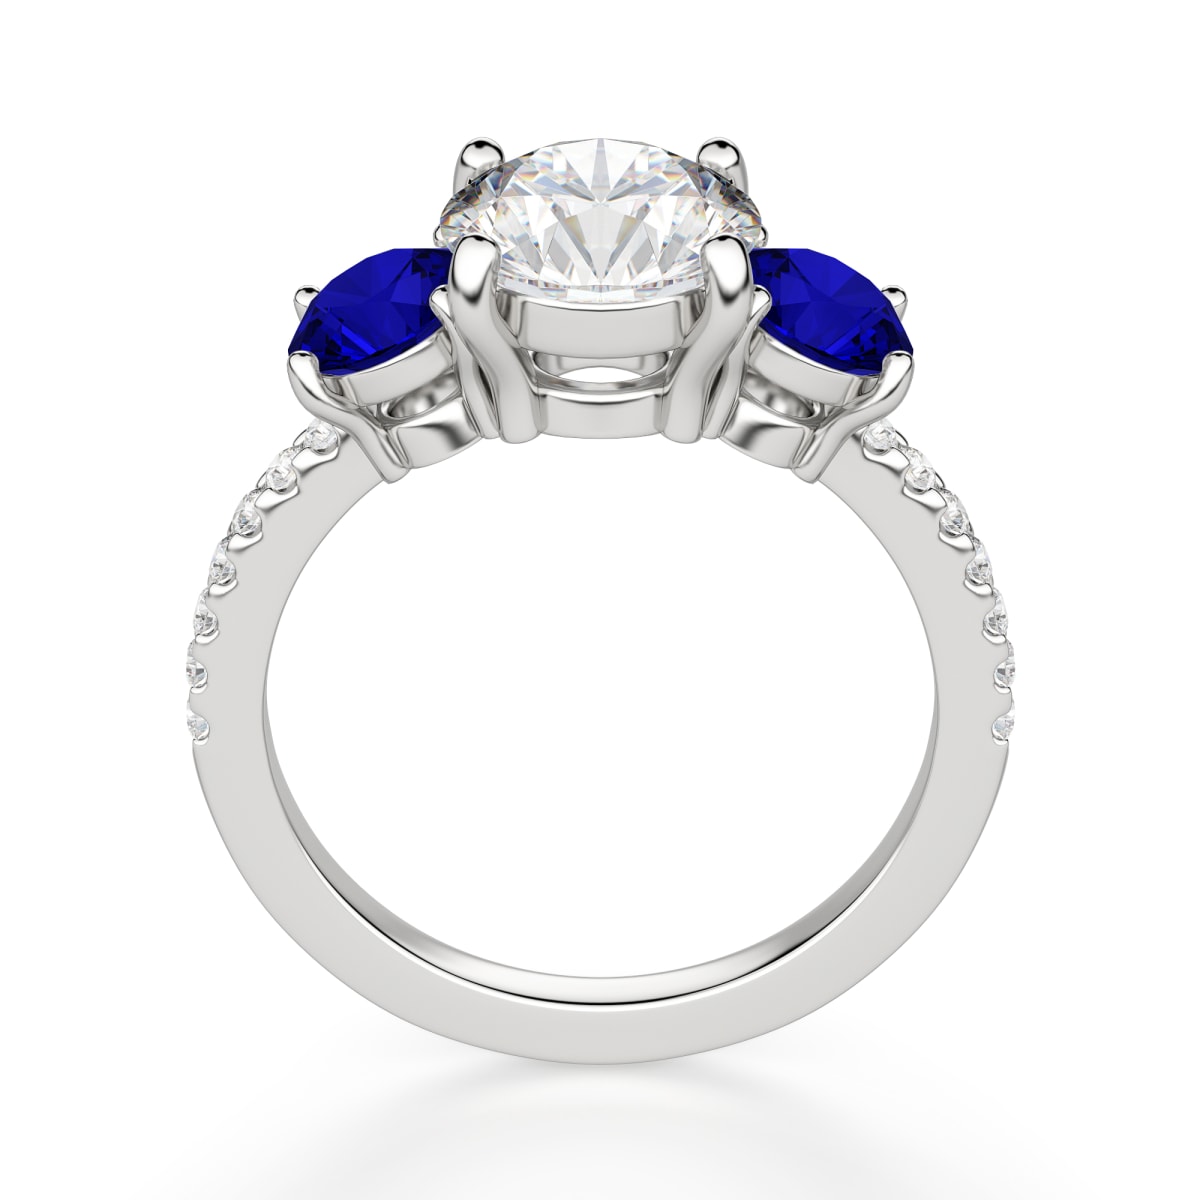 Amazon.com: PEORA Created Blue Sapphire Ring for Women 925 Sterling Silver,  Designer Criss-Cross Solitaire, 3 Carats Radiant Cut 9x7mm, Comfort Fit,  Size 5: Radiant Cut Engagement Rings: Clothing, Shoes & Jewelry